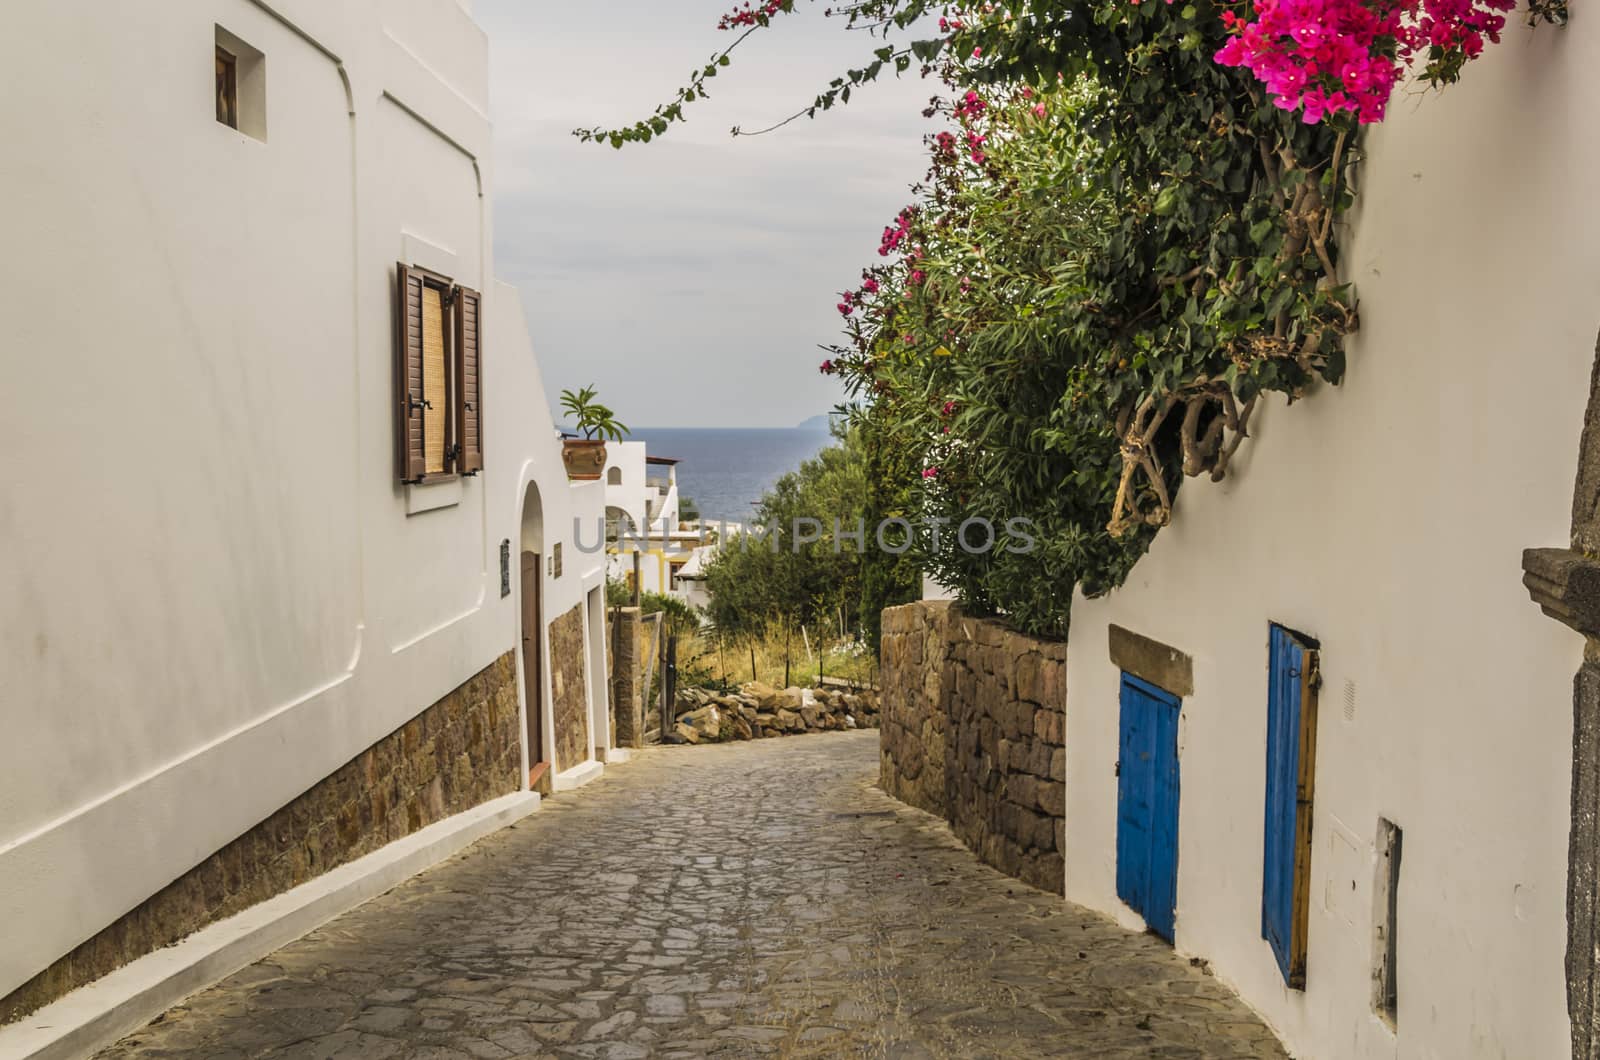 street of stones and white houses with colorful flowers and the sea tyrrhenian background panarea one of the Aeolian Islands